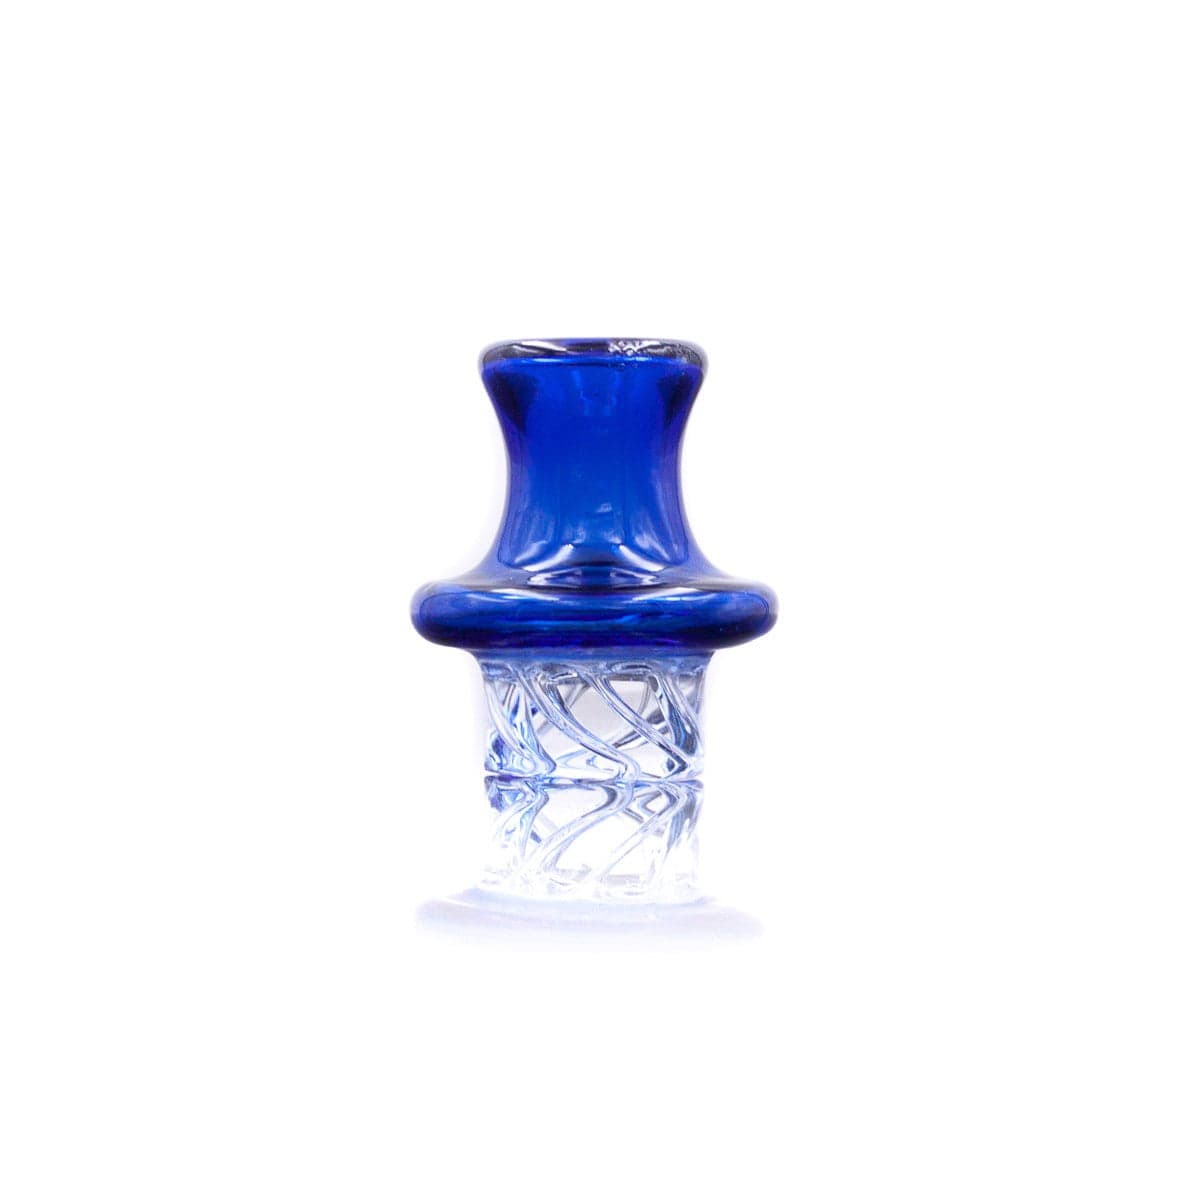 The Stash Shack Carb Cap Blue UFO Spinning Carb Cap